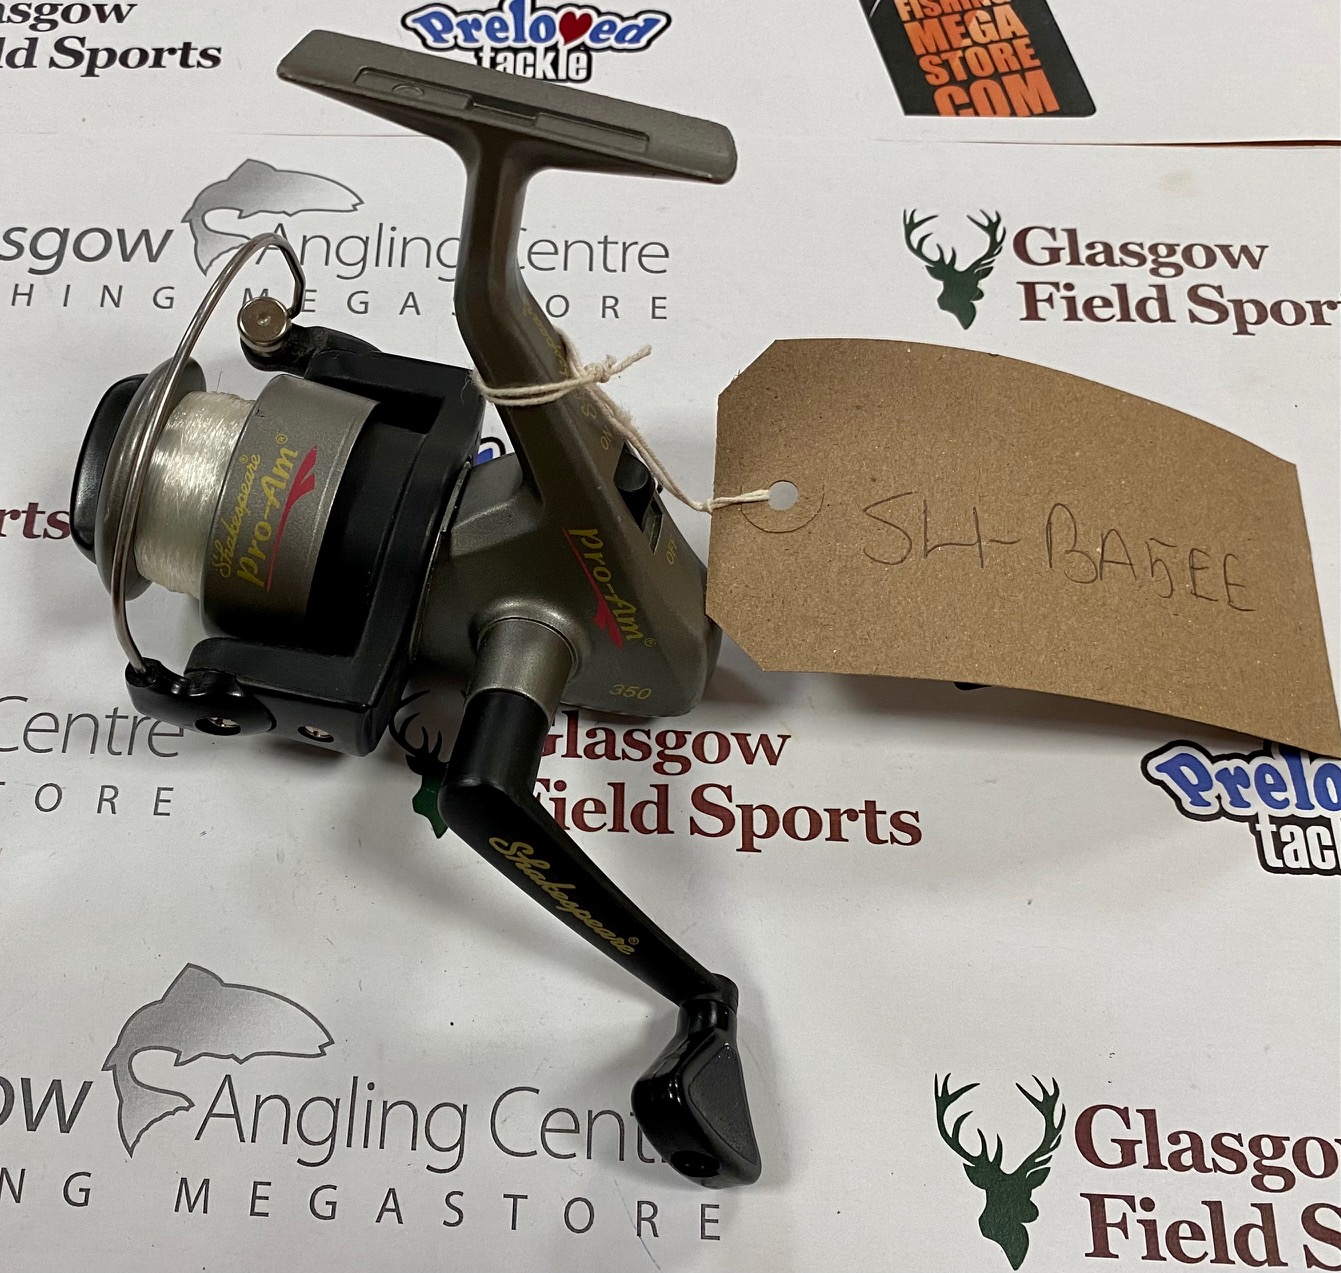 Preloved Shakespeare Pro-Am 350 FD Spinning Reel (unboxed) - Used